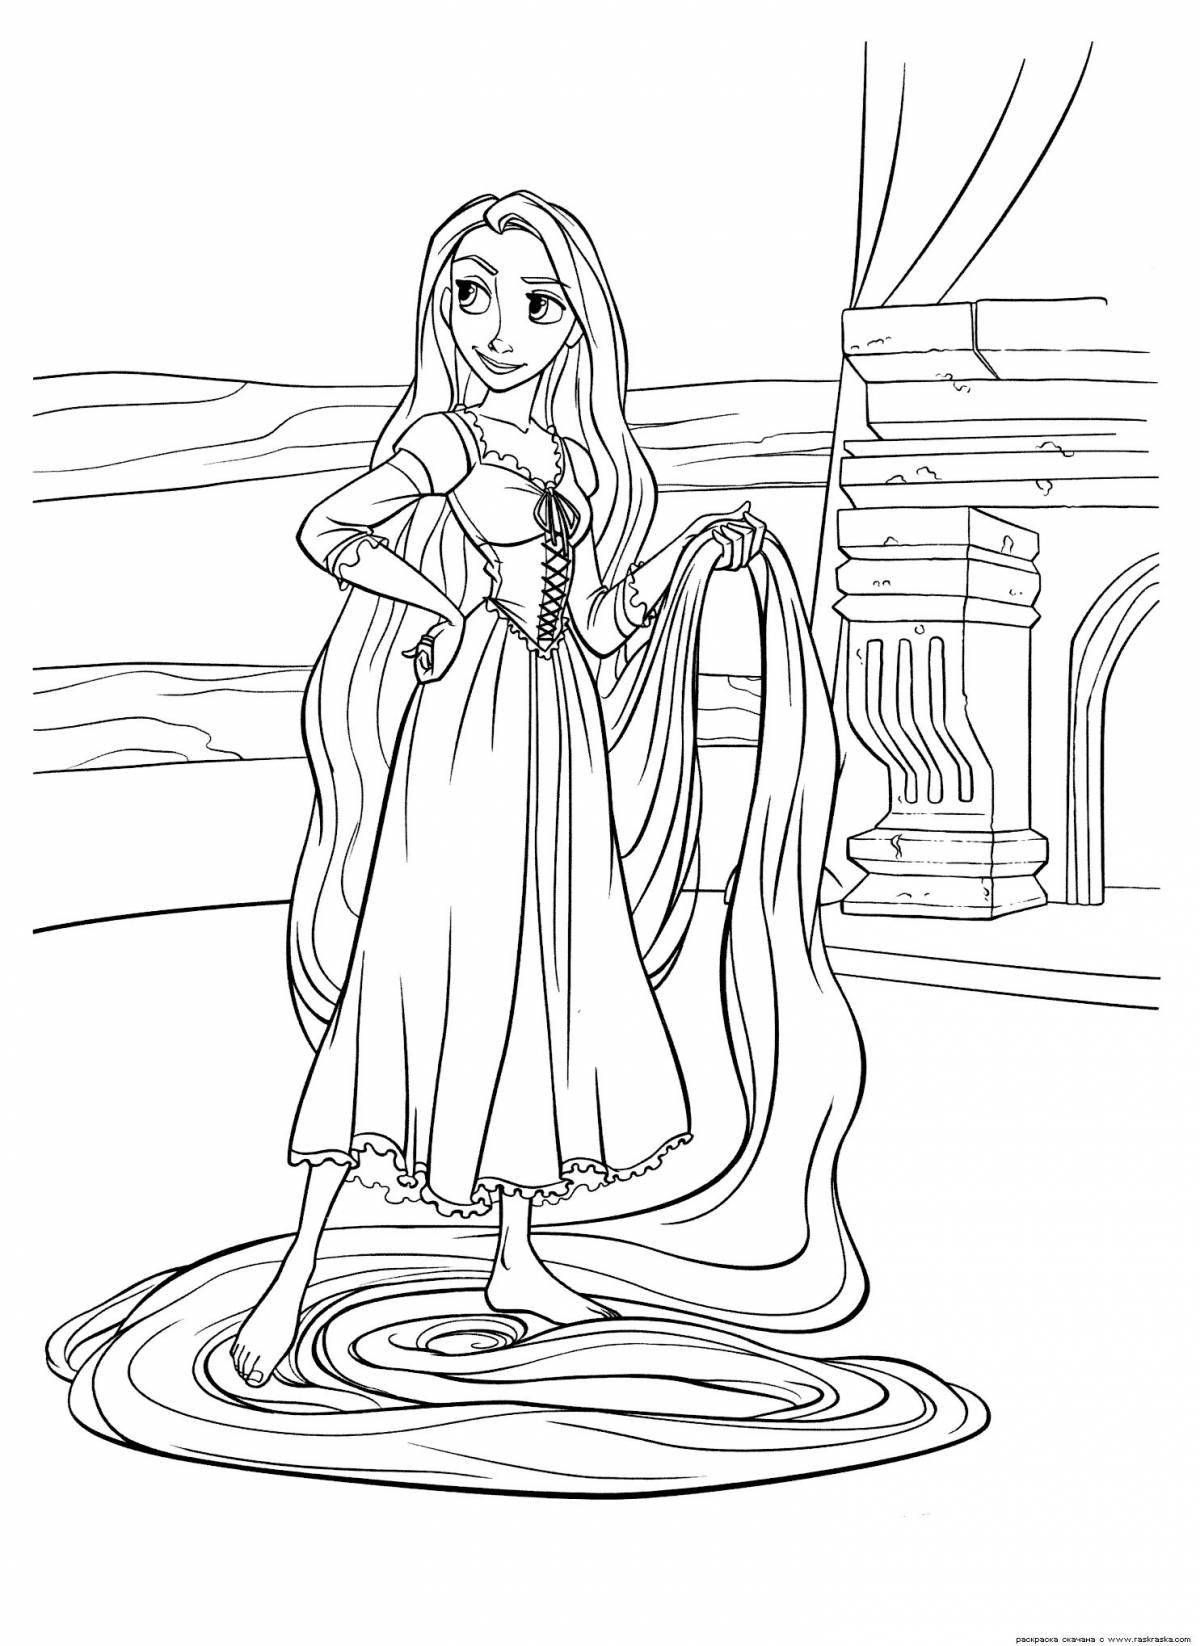 Wonderful Rapunzel coloring book for kids 5-6 years old